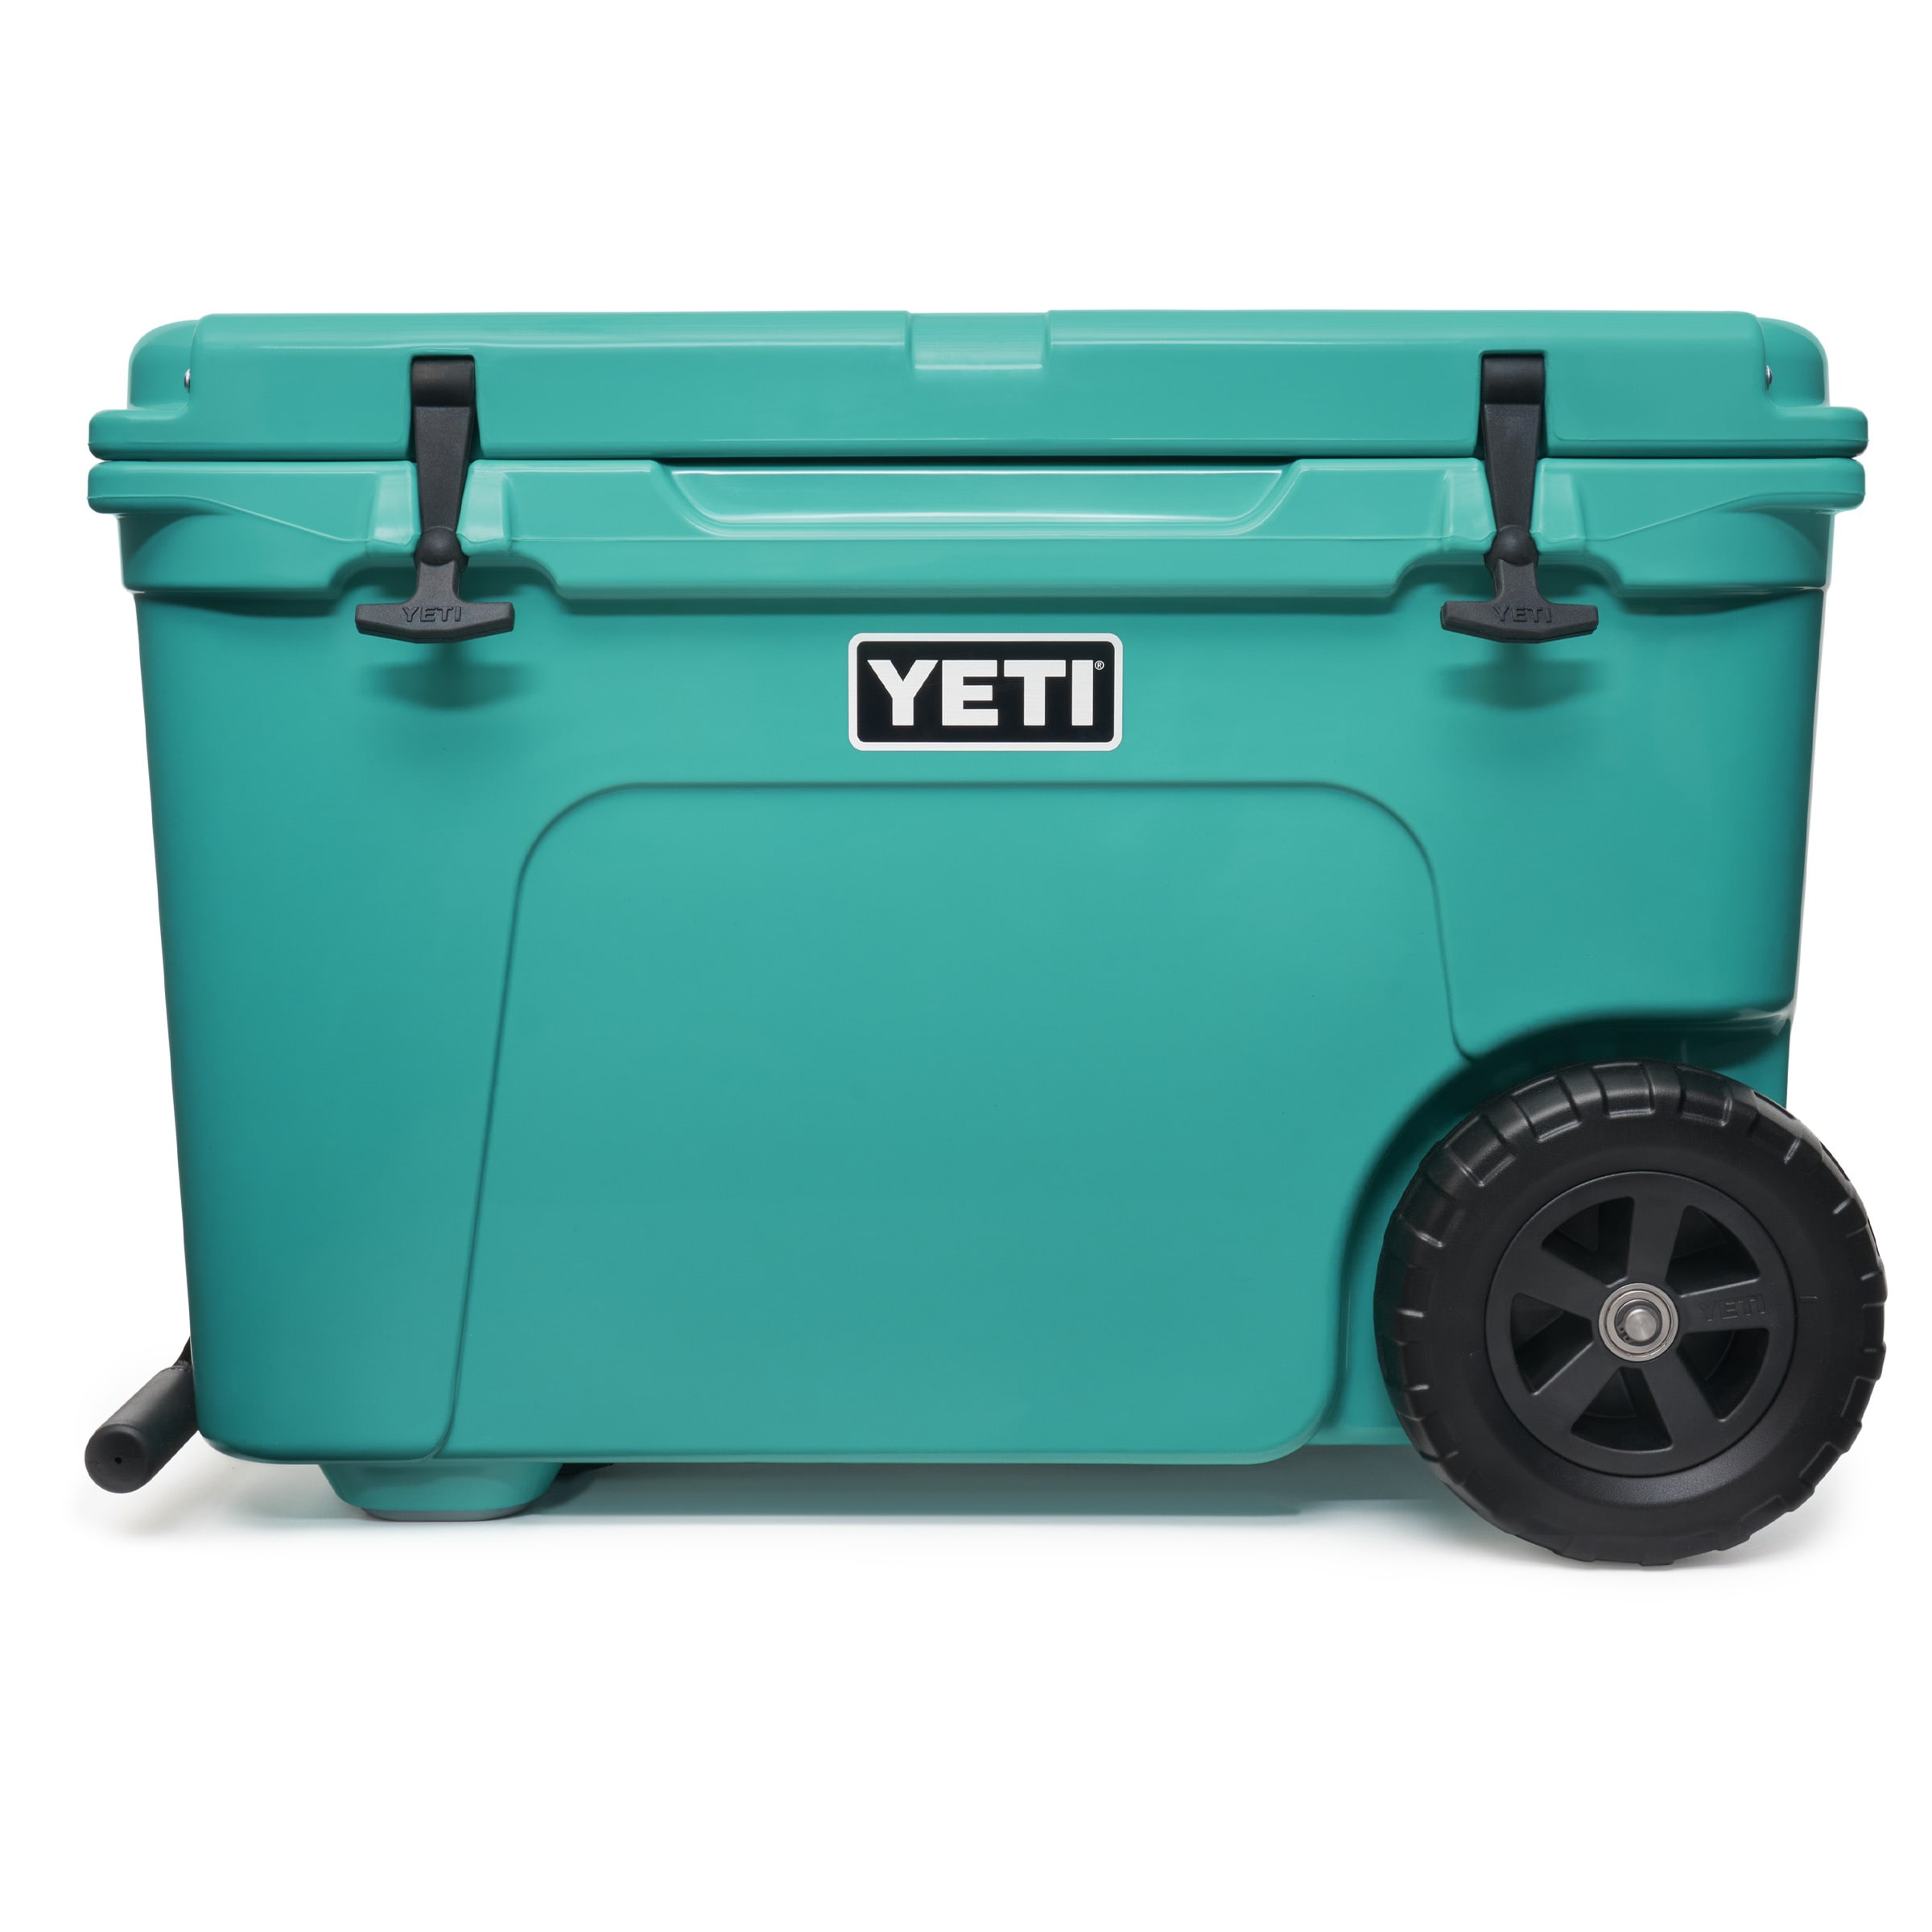 Cup Holder Compatible with YETI Tundra and Tundra Haul Wheeled Cooler